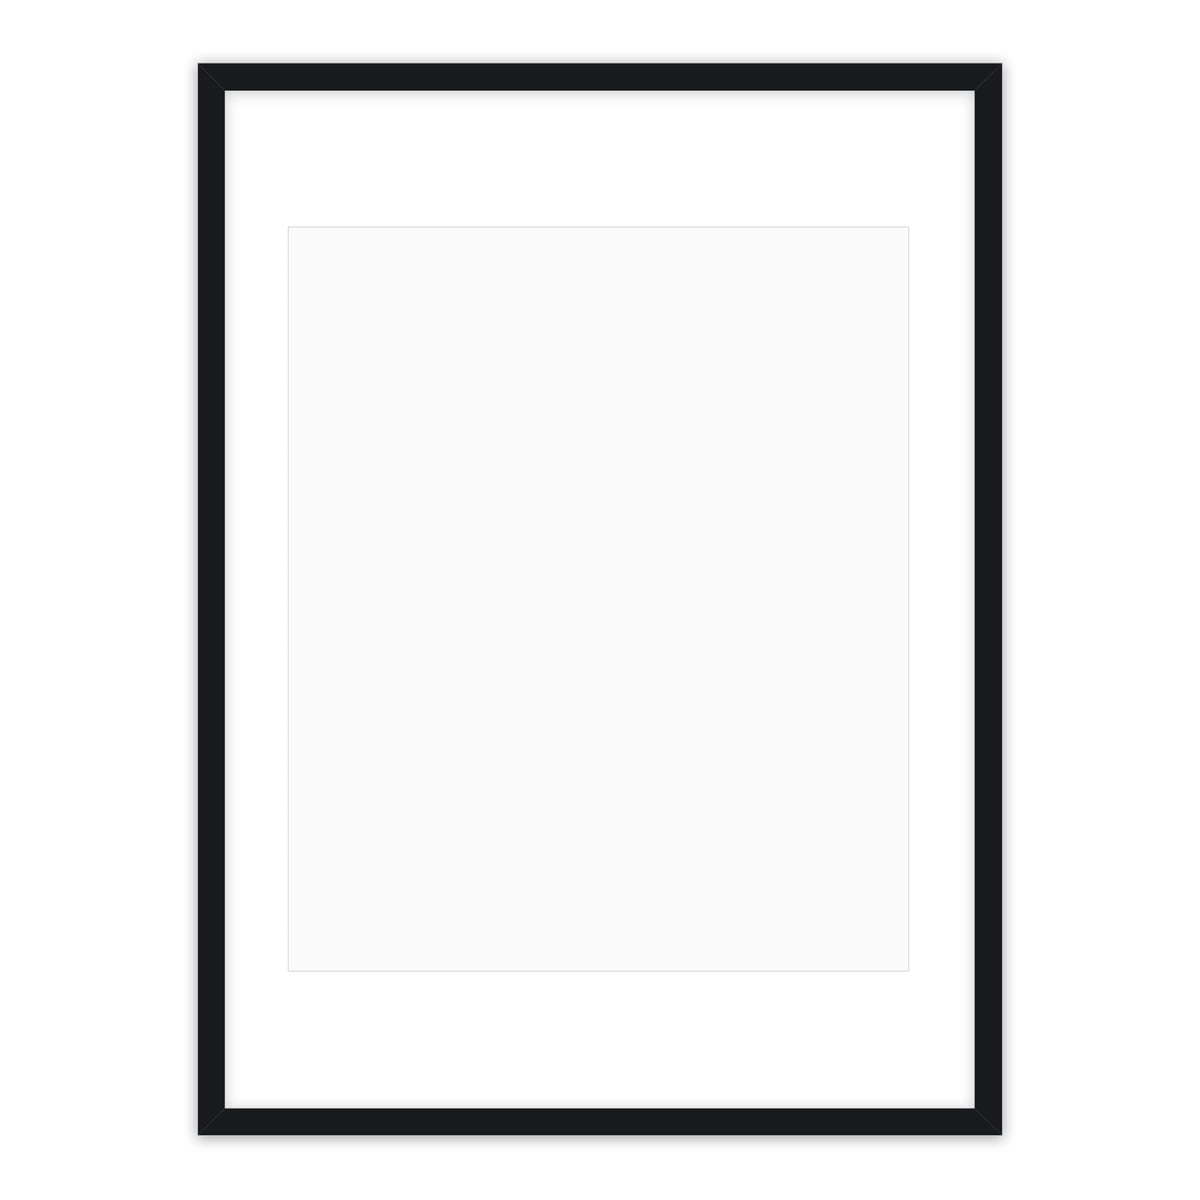 DELUXE35 Picture Frame 60x44 cm or 44x60 cm Photo/Gallery/Poster Frame 